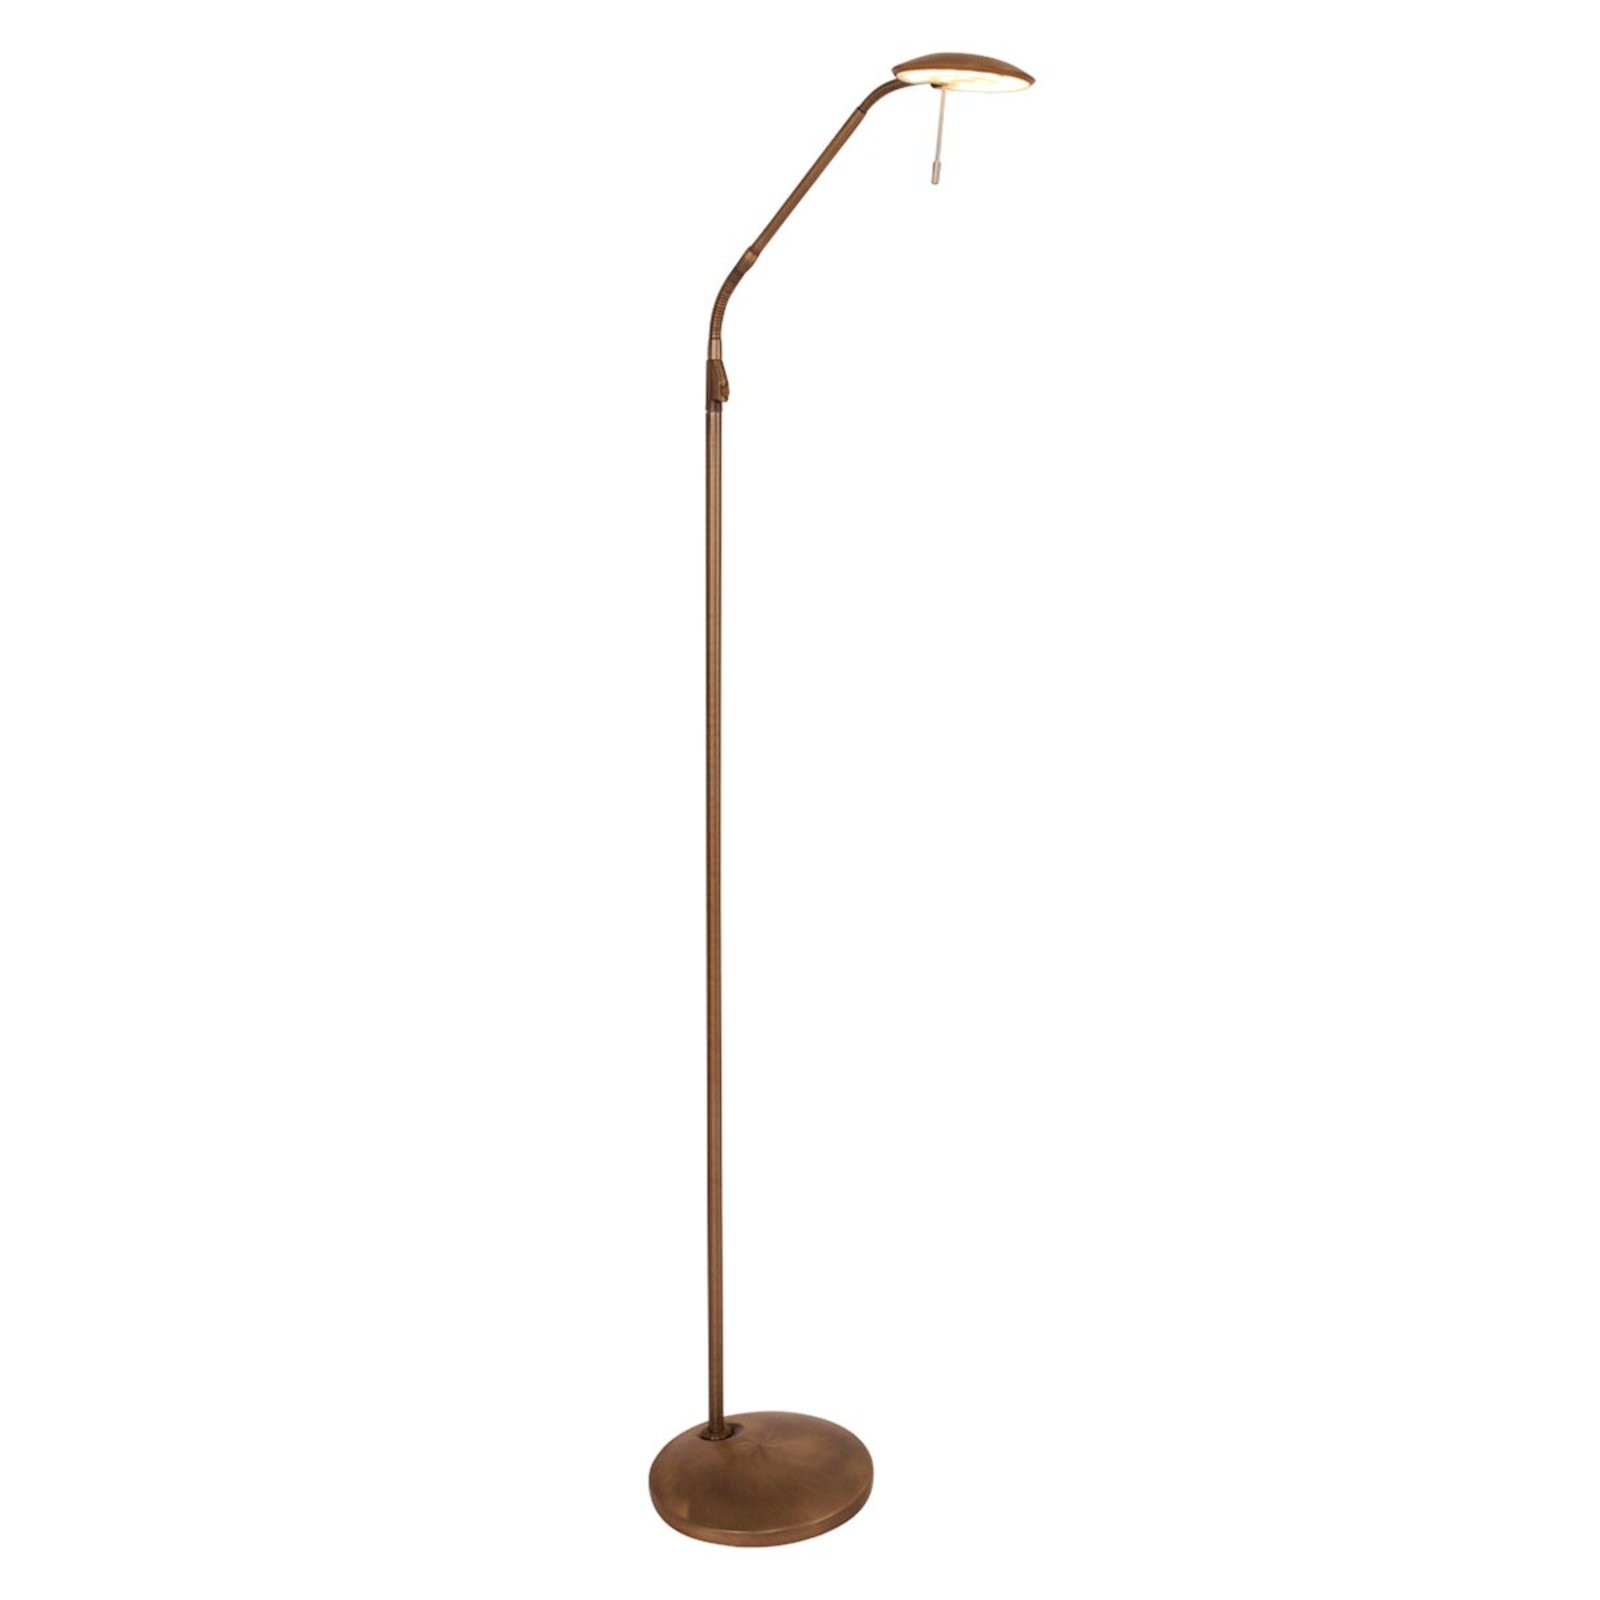 Bronze finish - LED floor lamp Zenith with dimmer